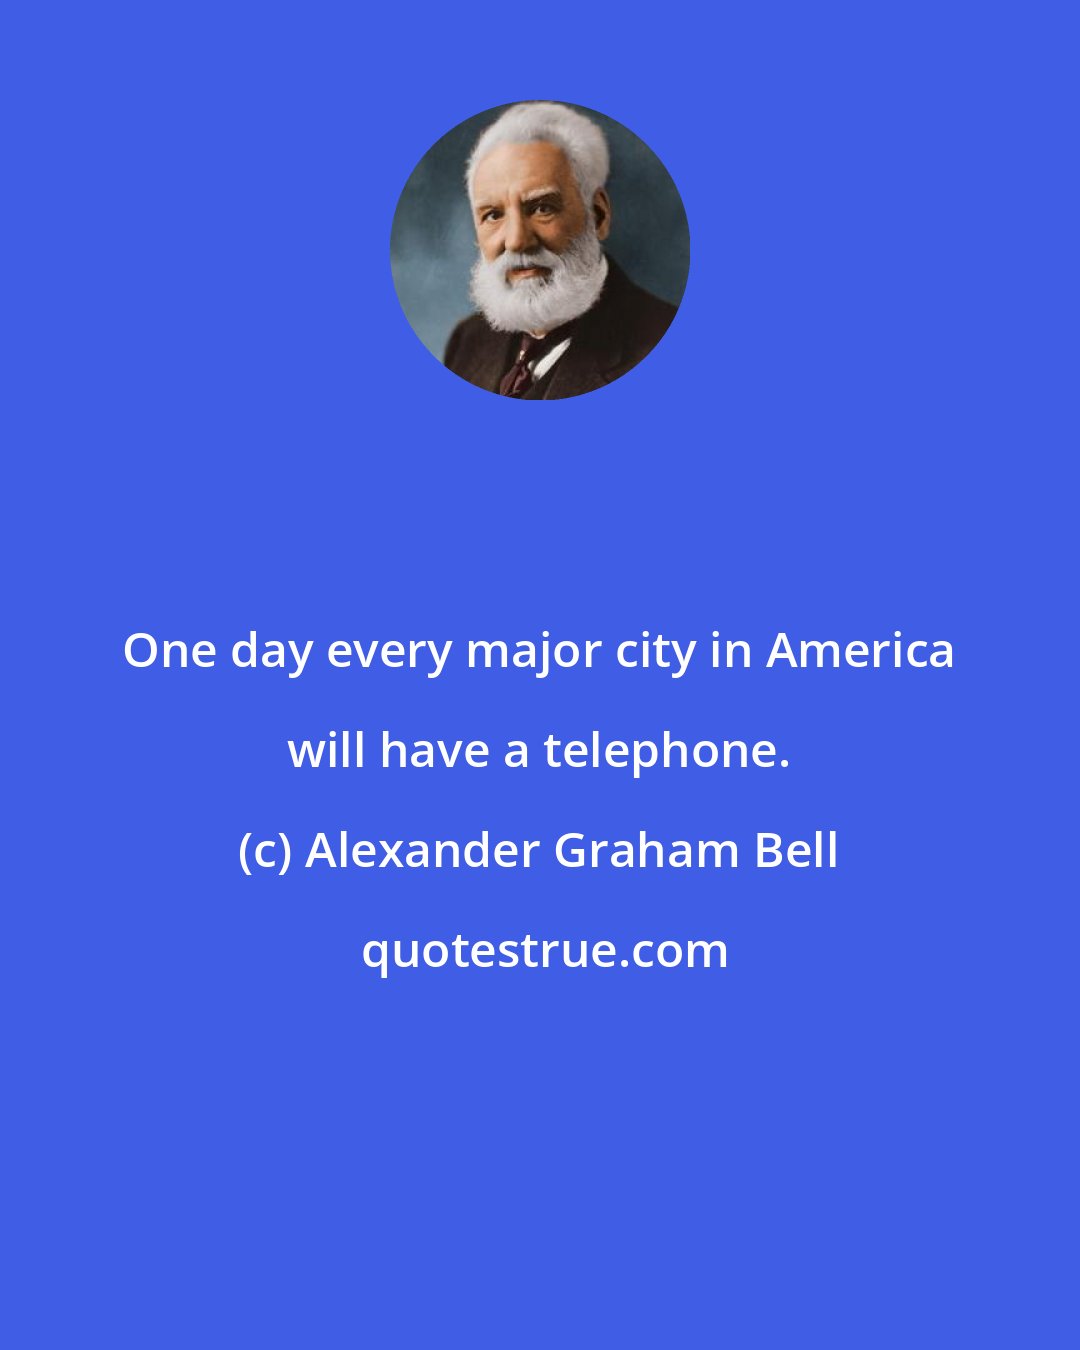 Alexander Graham Bell: One day every major city in America will have a telephone.